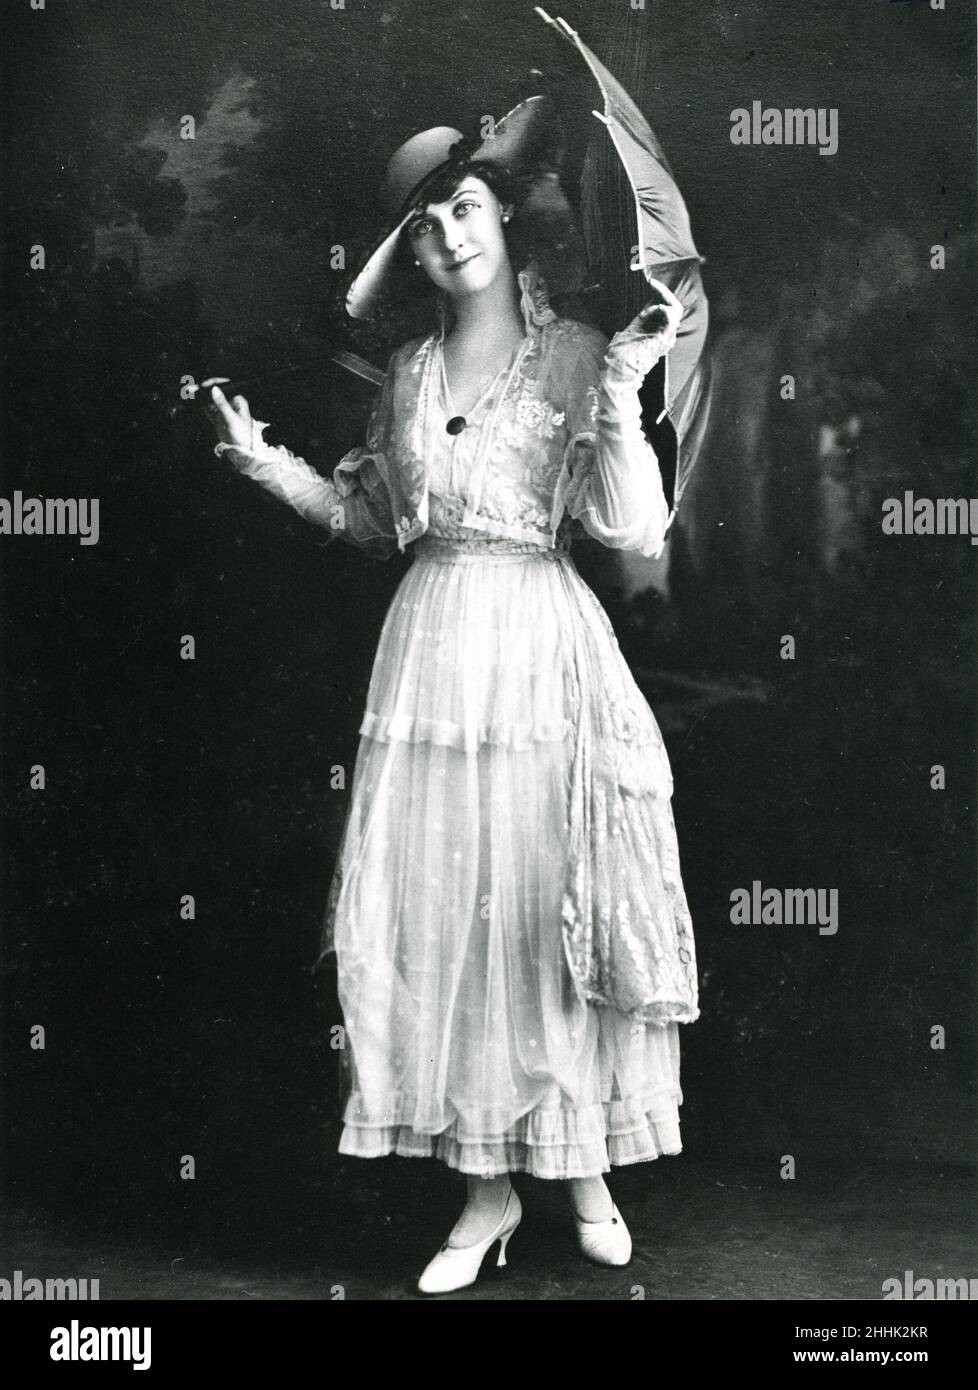 Mamie Geneva Dowd (ca. 1915) before her marriage to Dwight David Eisenhower in 1916. Photographer unknown. Stock Photo